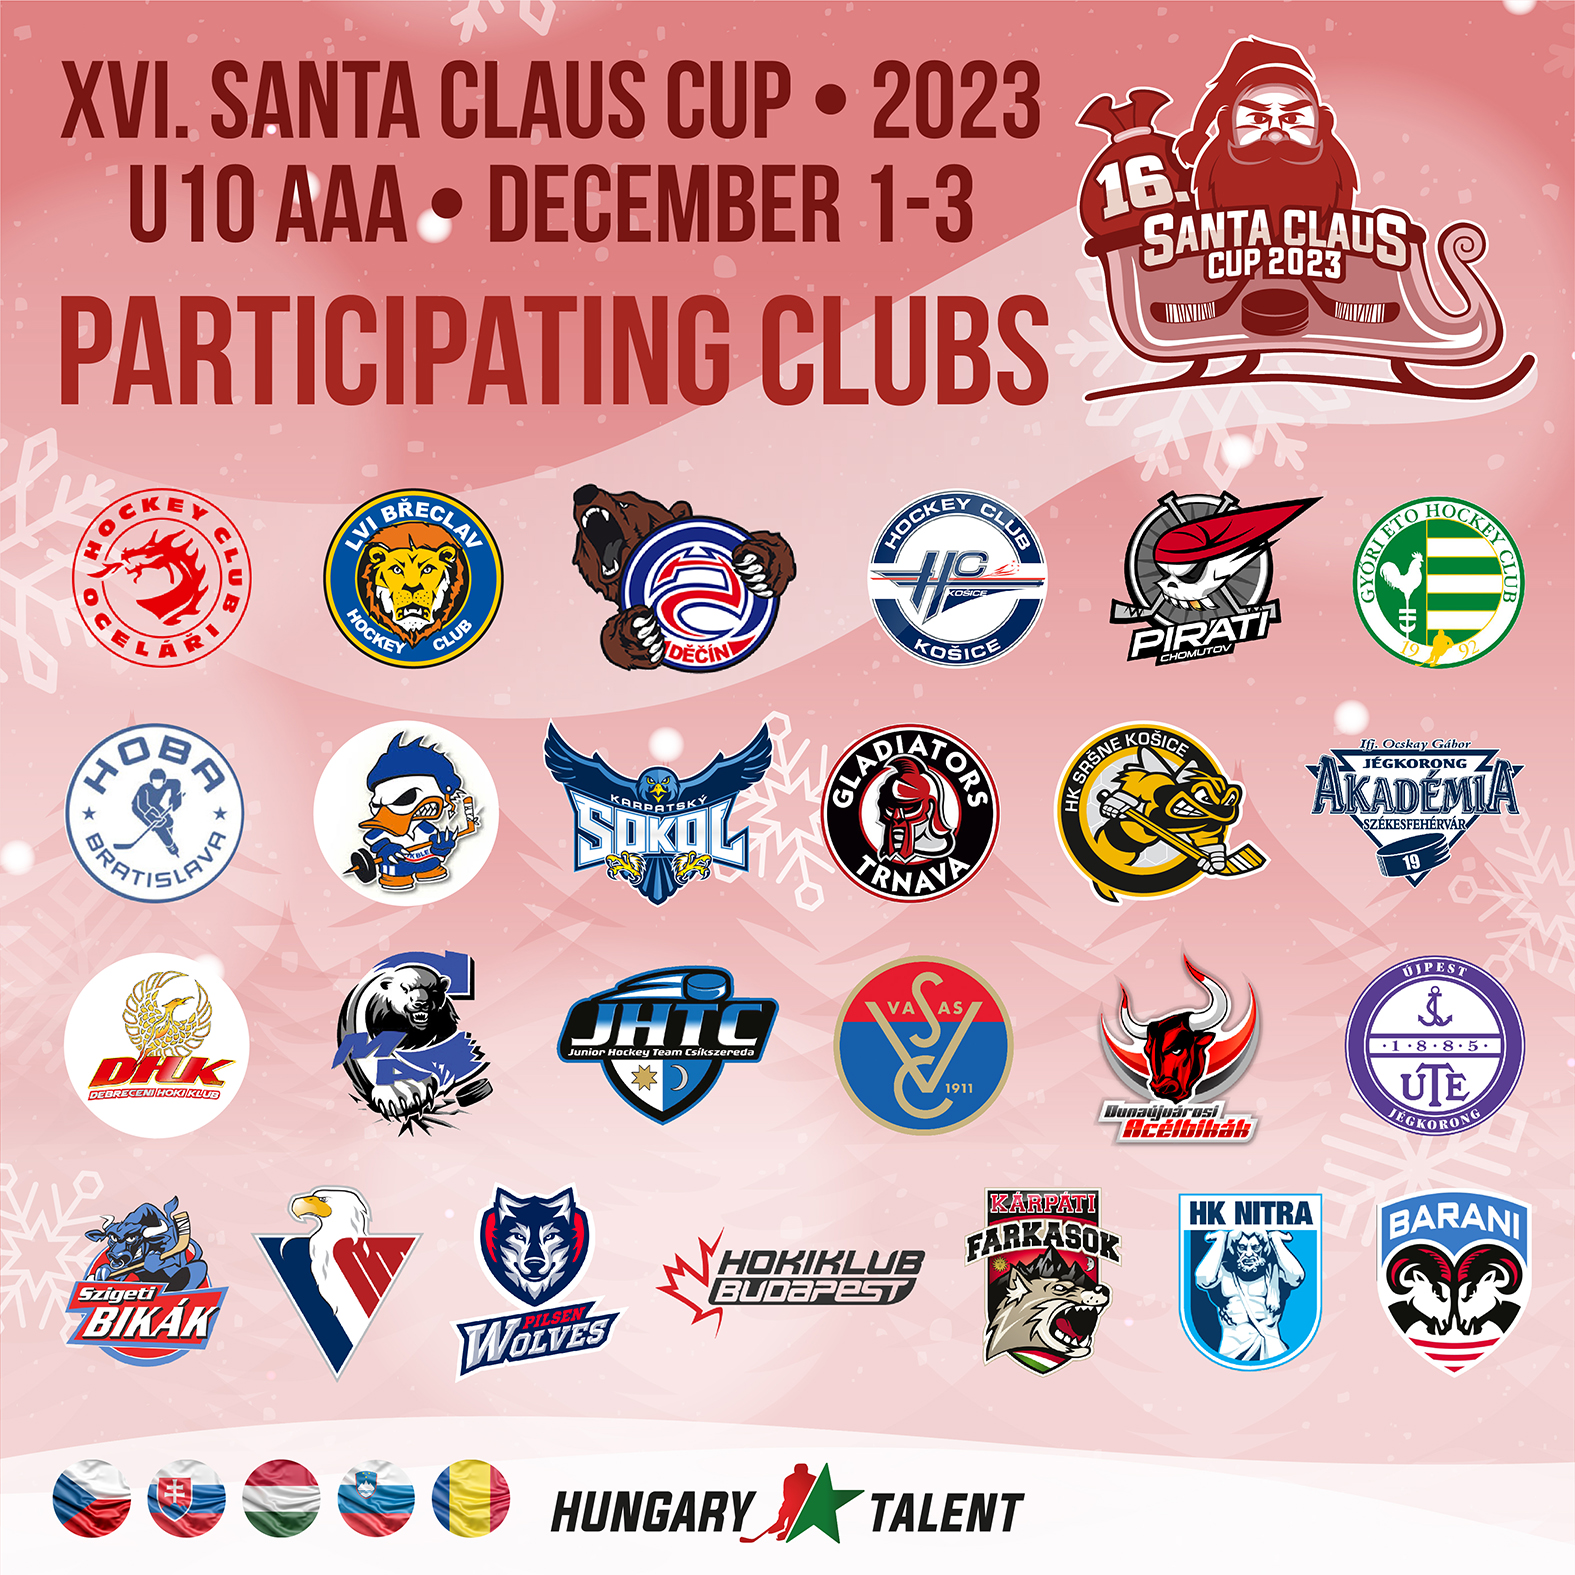 Introducing the AAA level of the 16th Santa Claus Cup